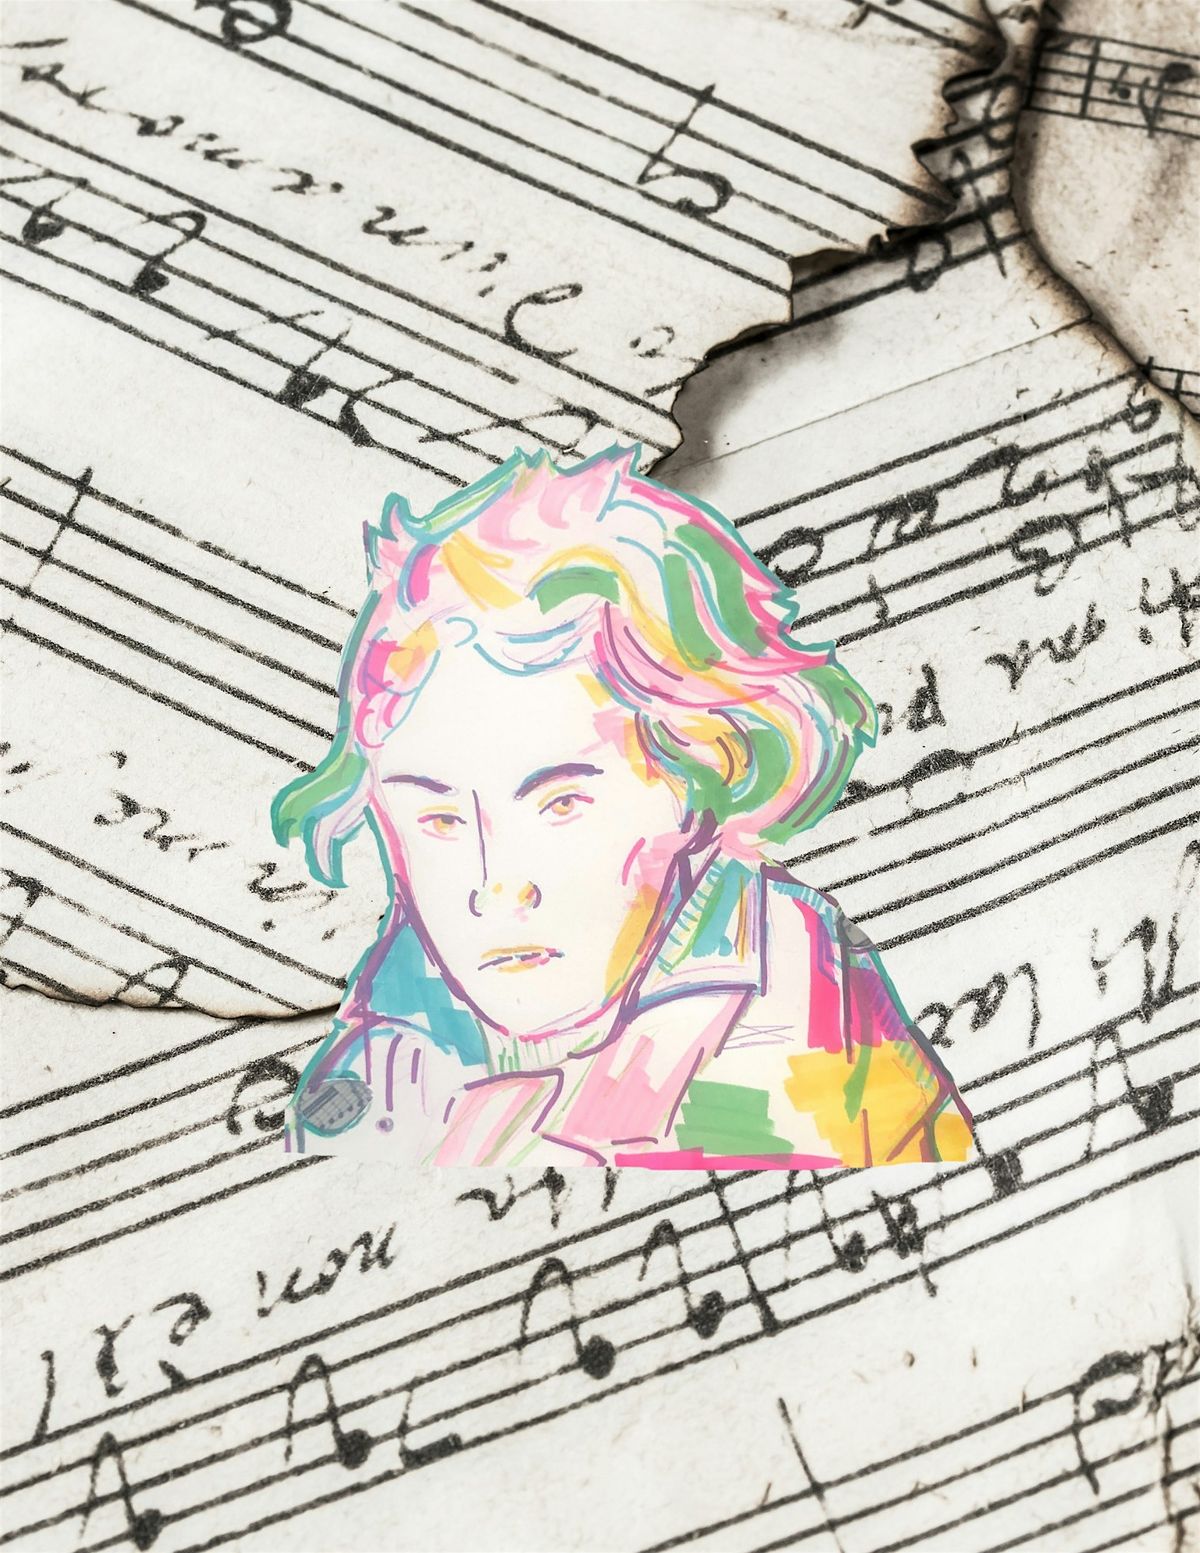 Come Sing With Us: Beethoven's 9th Symphony